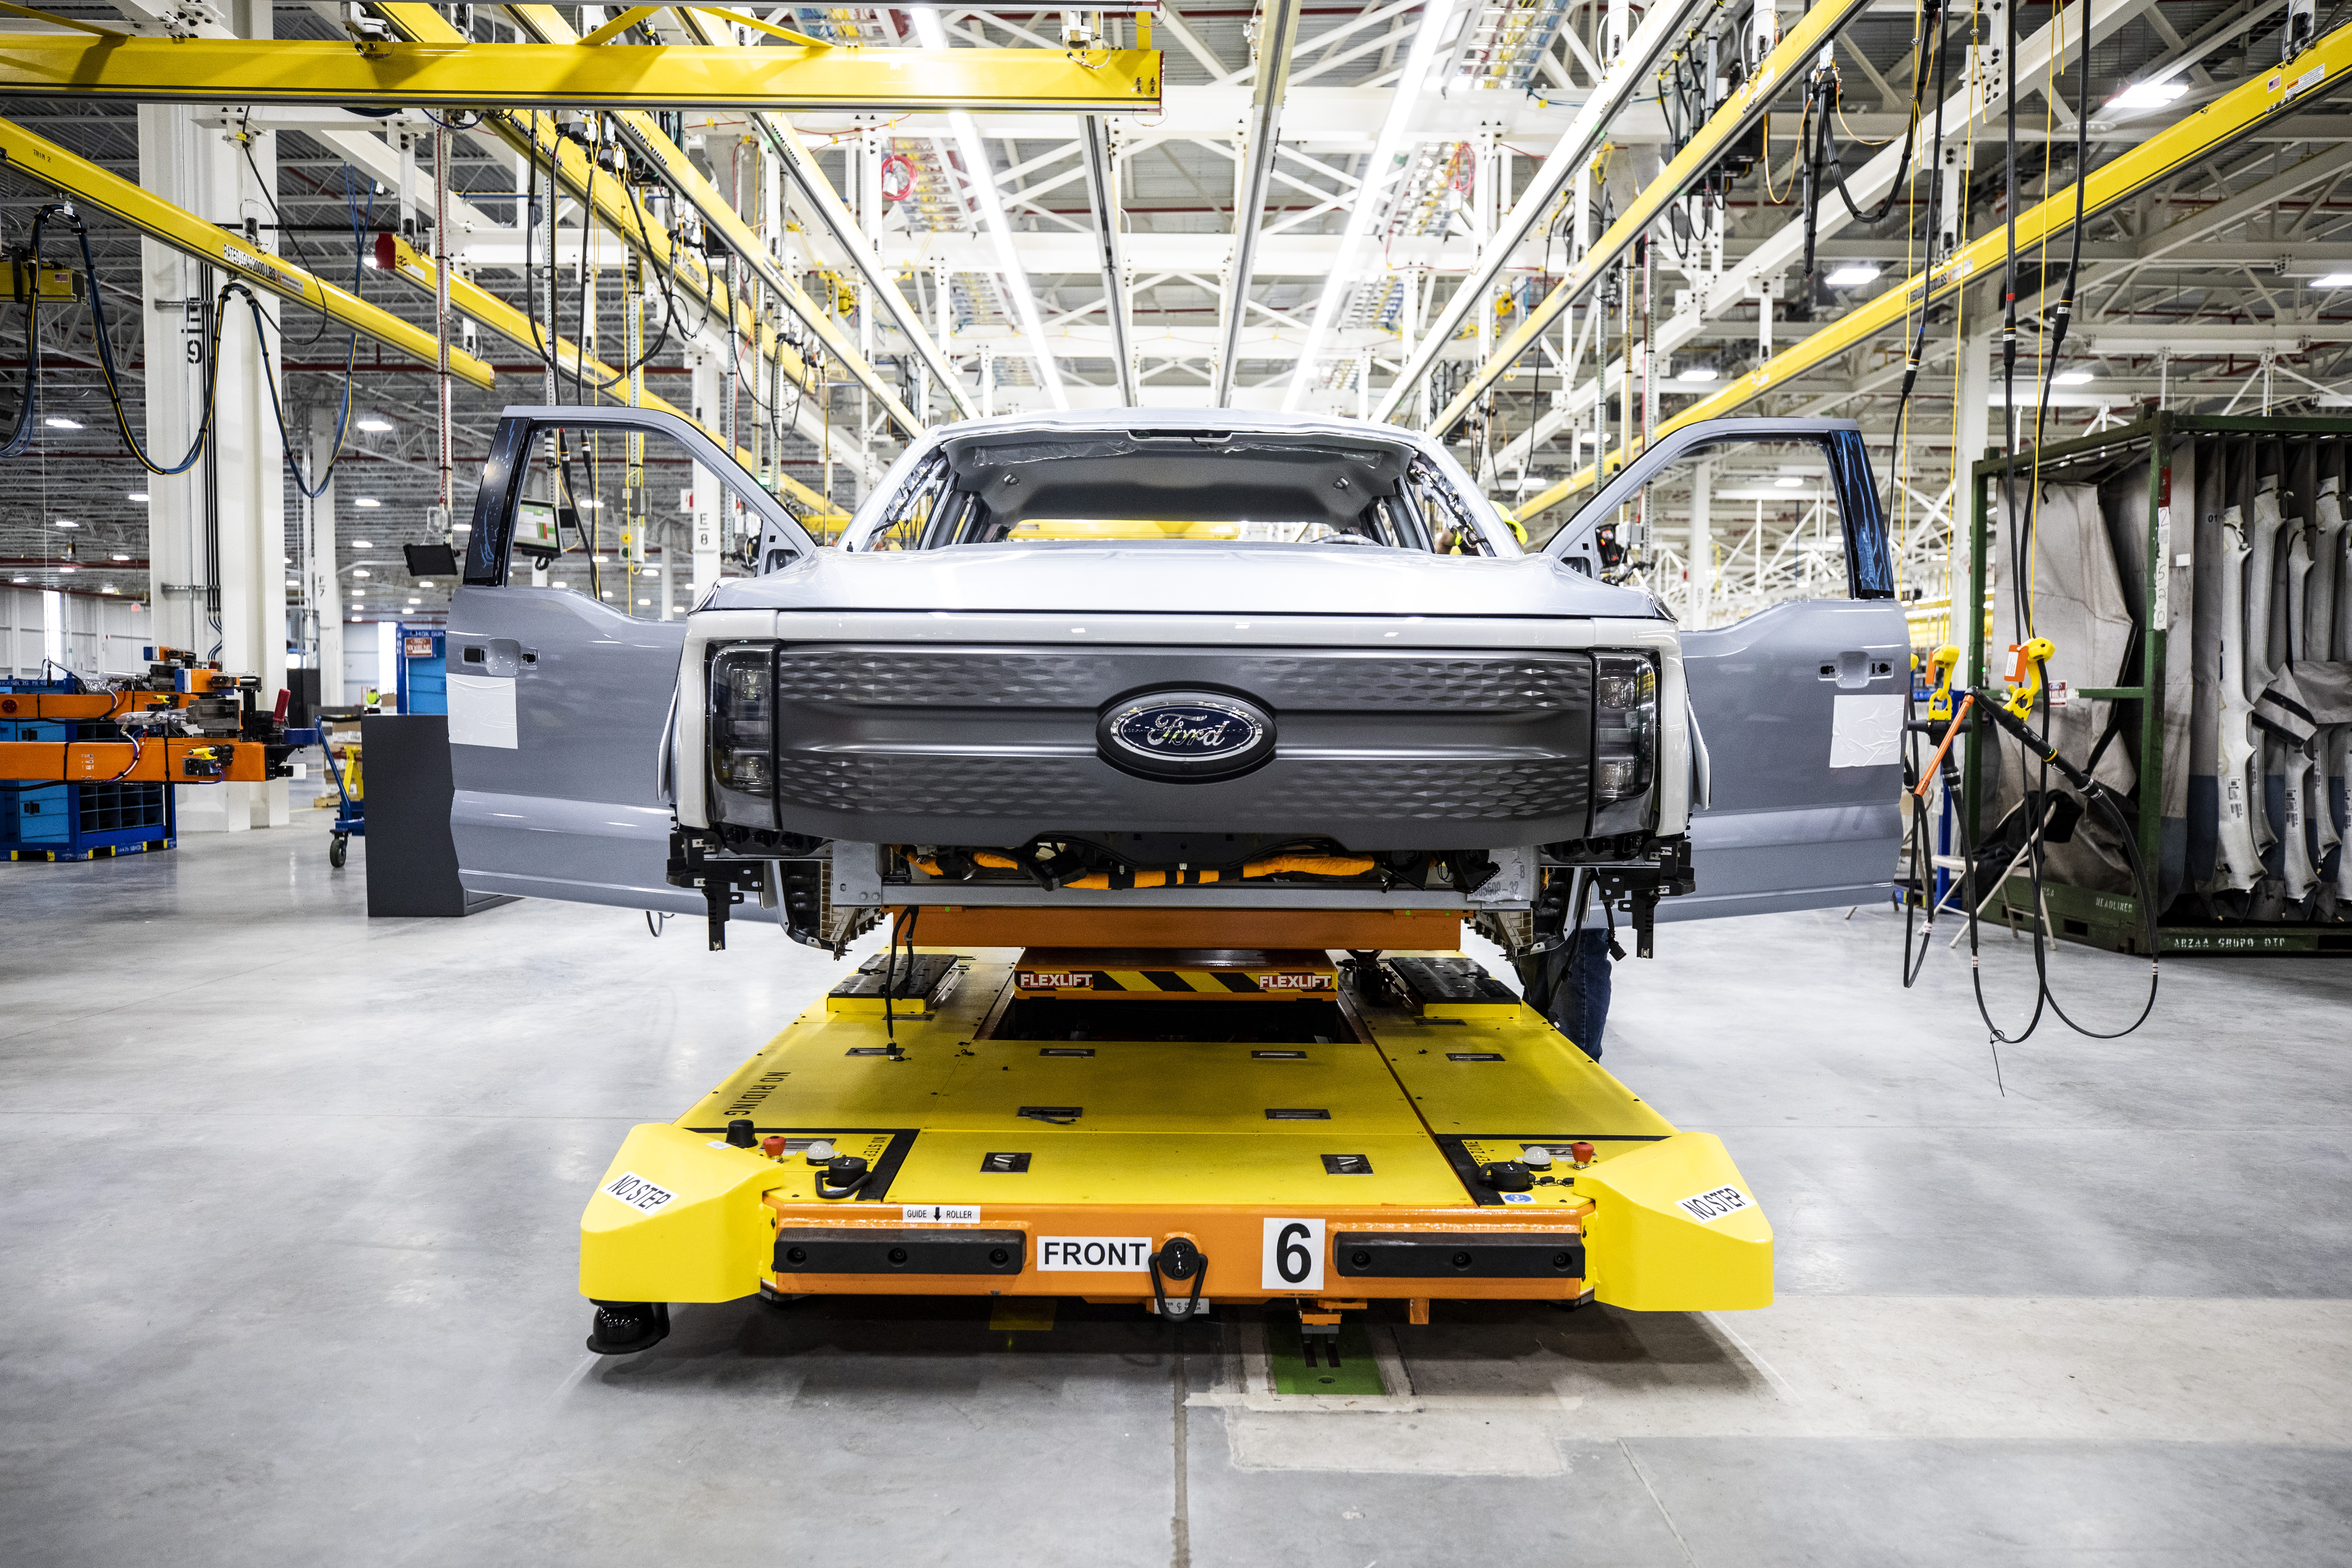 New Ford 'Built Ford Proud' Campaign Celebrates the Next